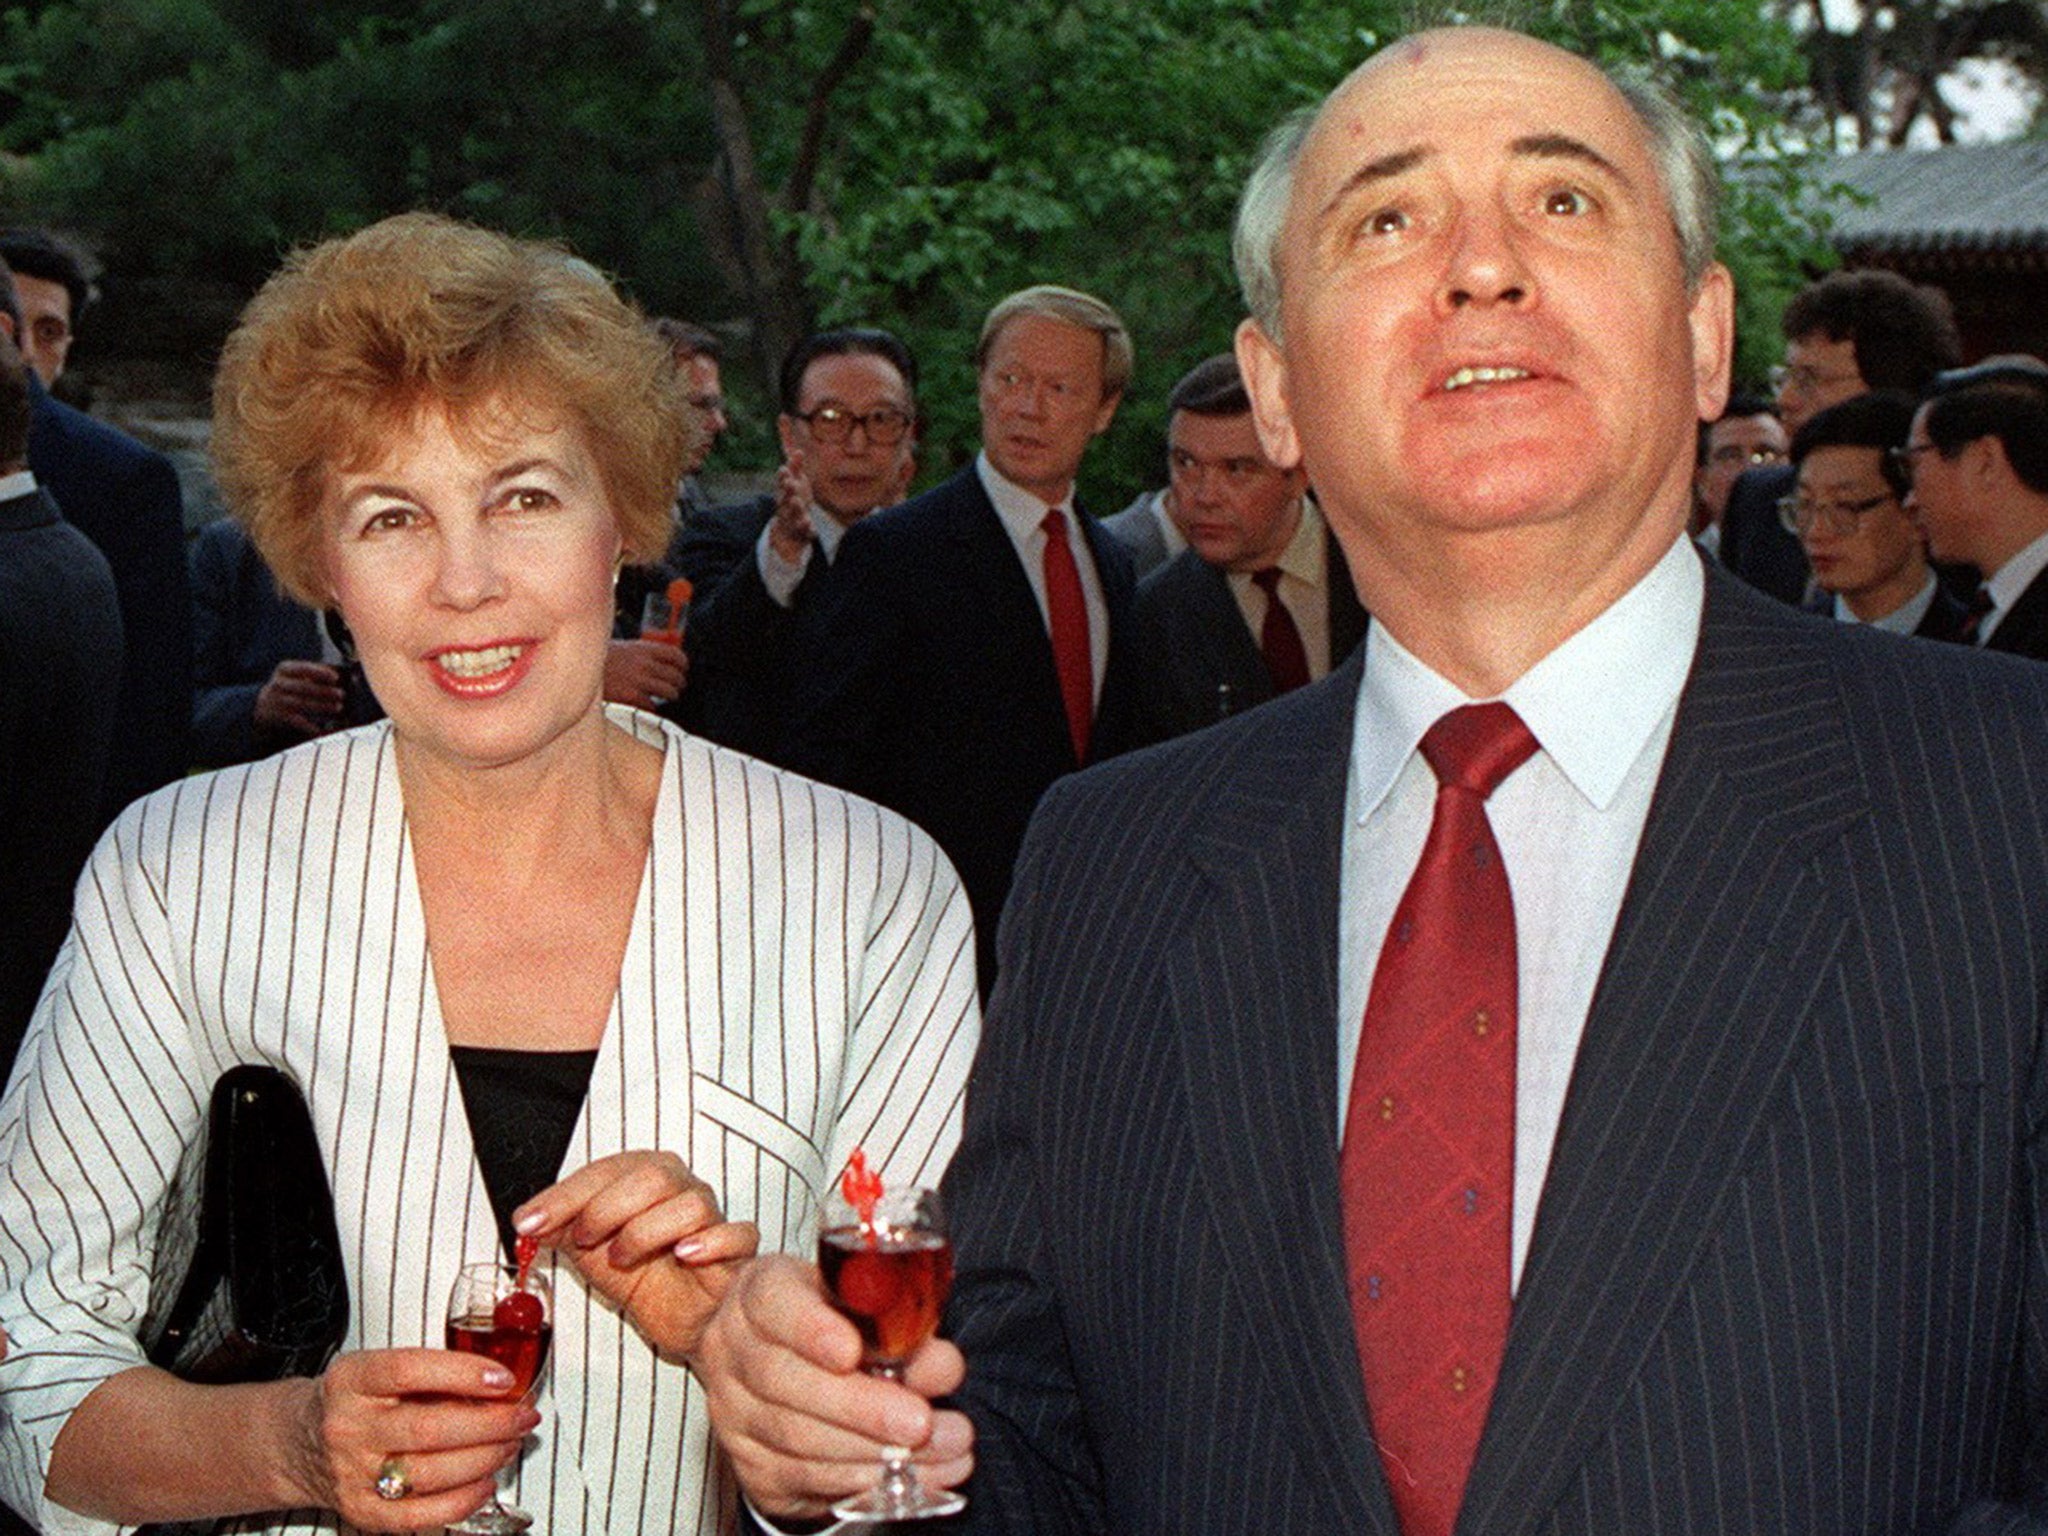 Mikhail Gorbachev: I know that helping children is what Raisa believed